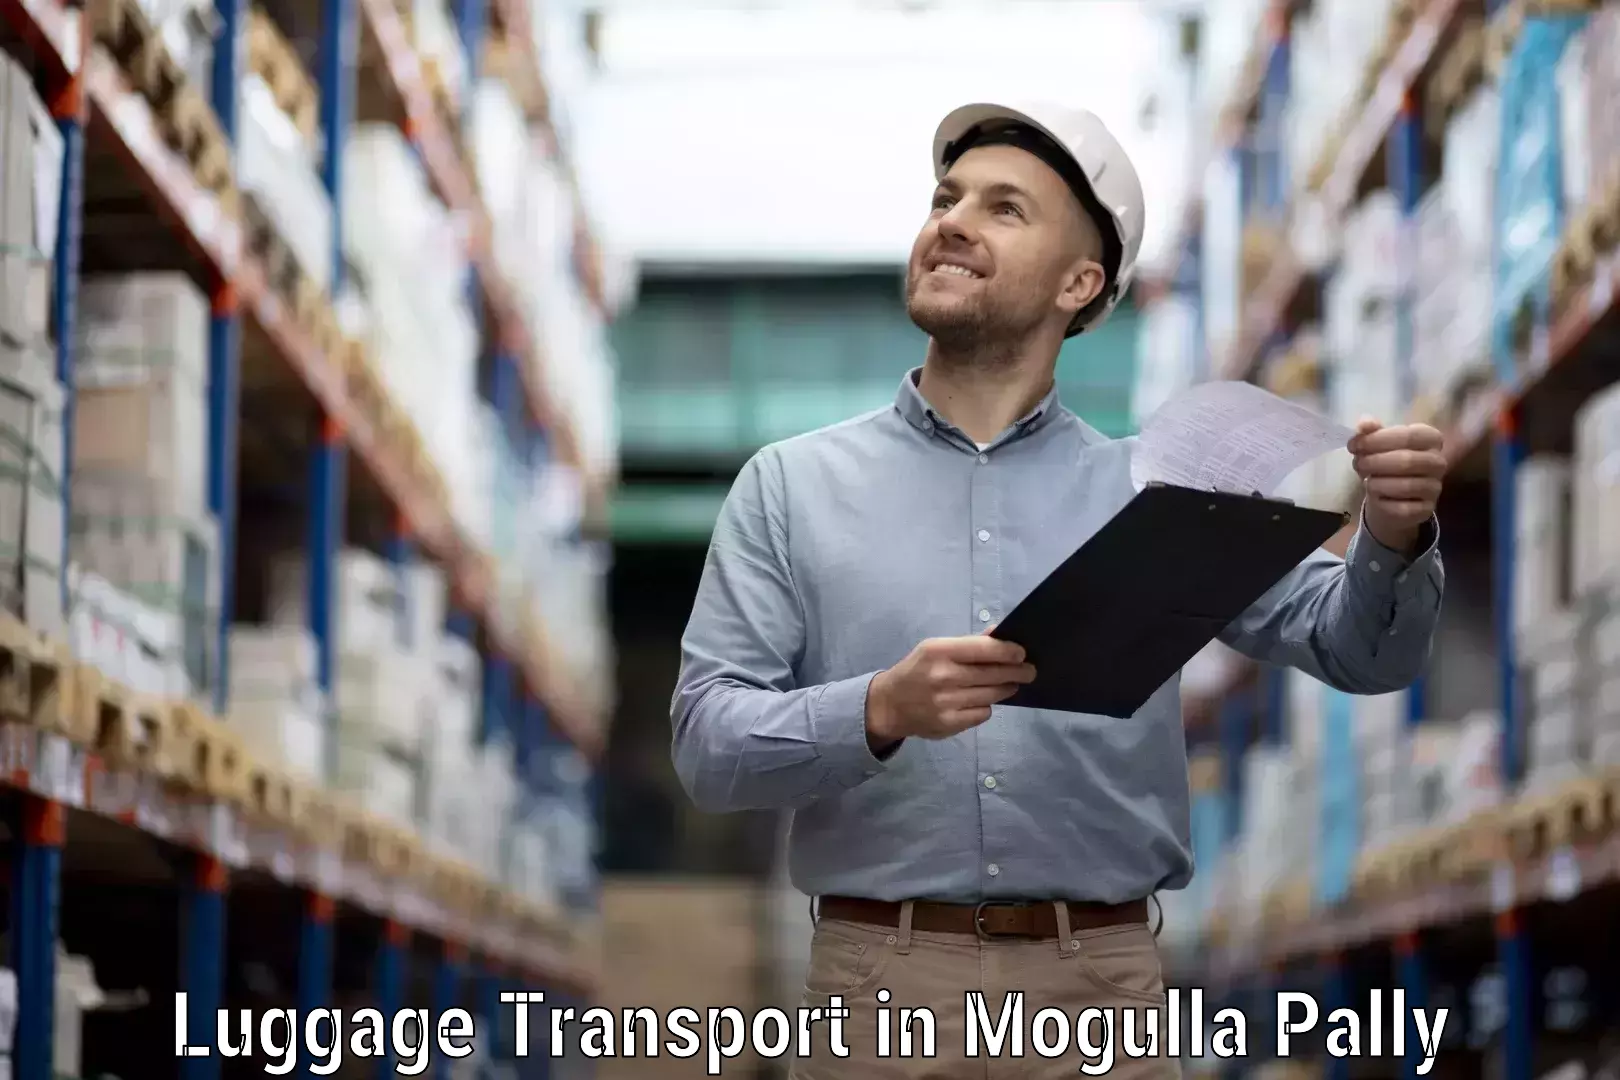 Luggage transport deals in Mogulla Pally